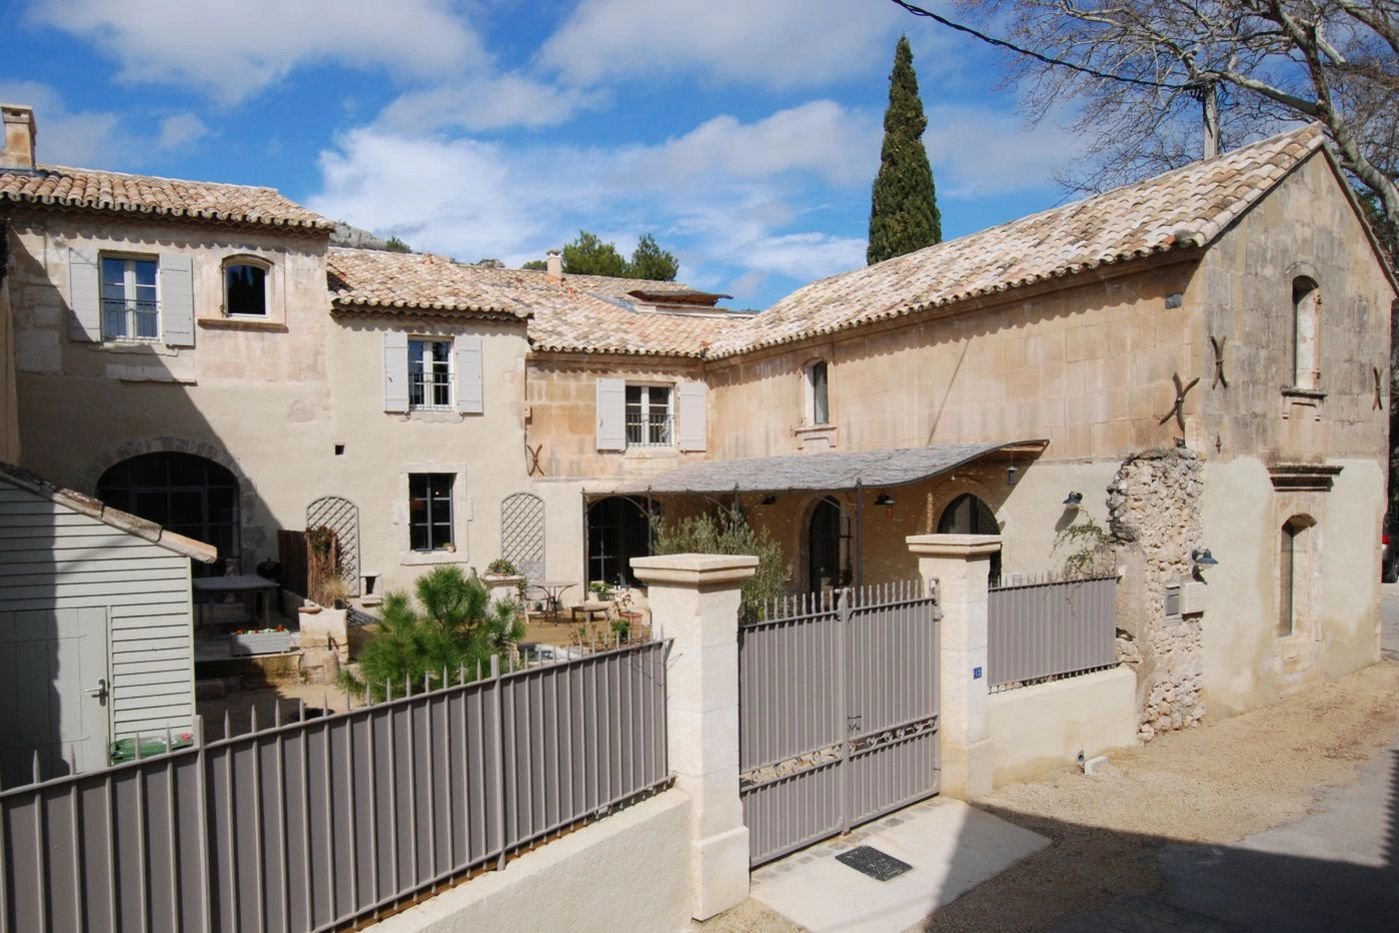 Exceptionally restored property in a hamlet near Maussane les Alpilles